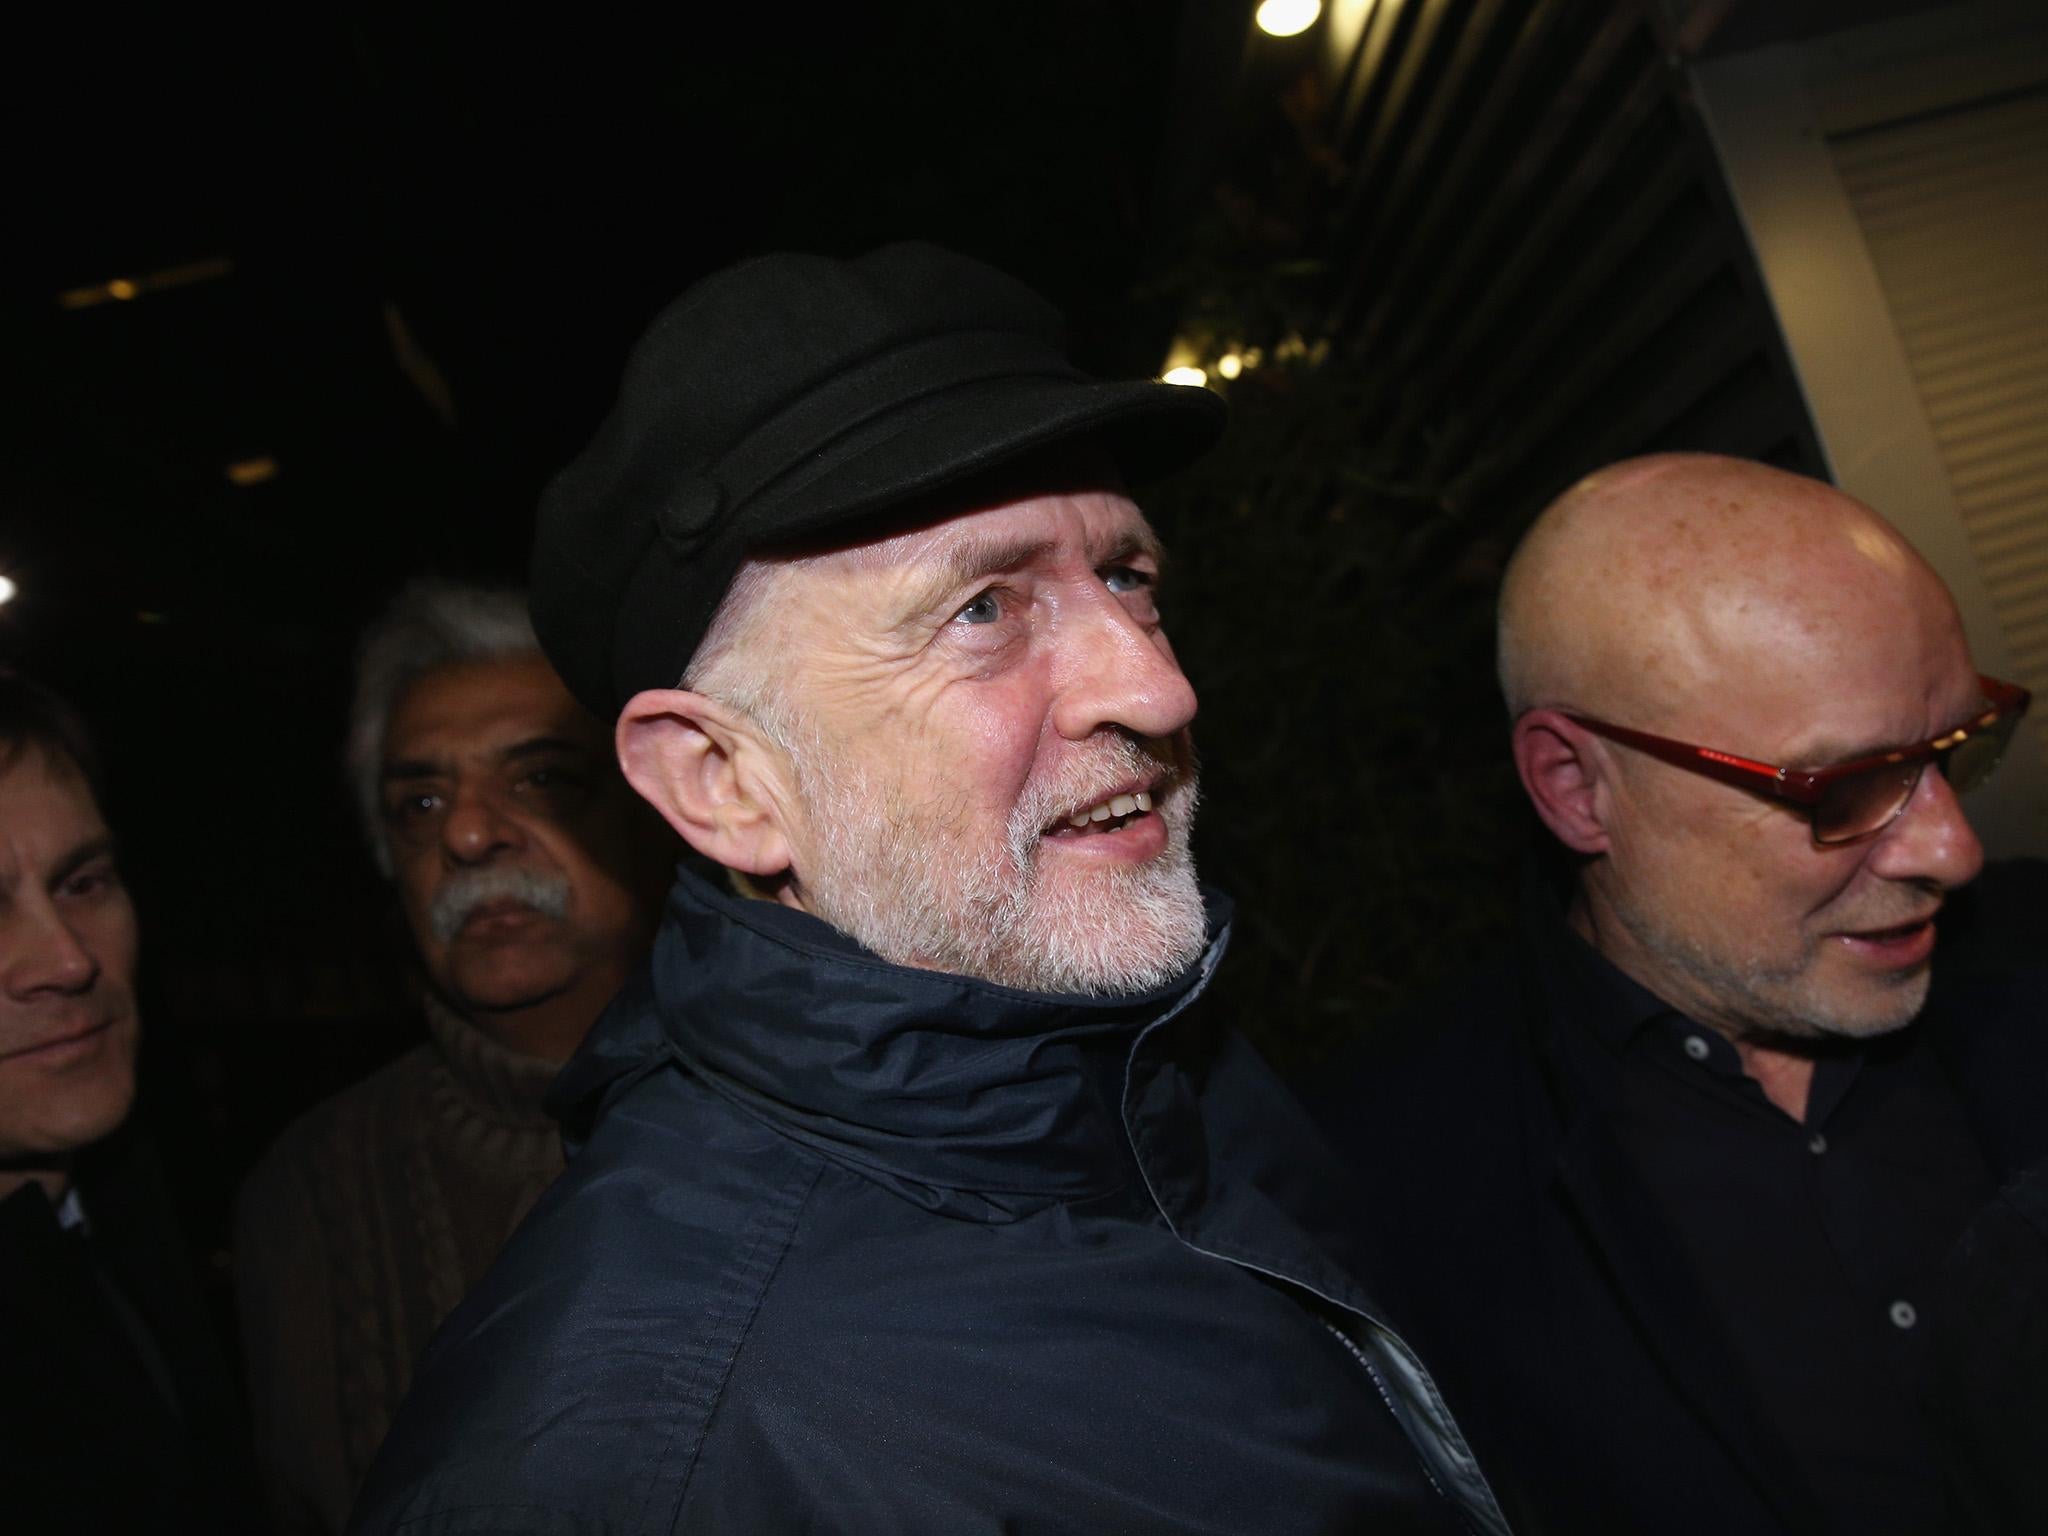 Stop the War coalition’s former chair, Jeremy Corbyn, backs its stance on Syria